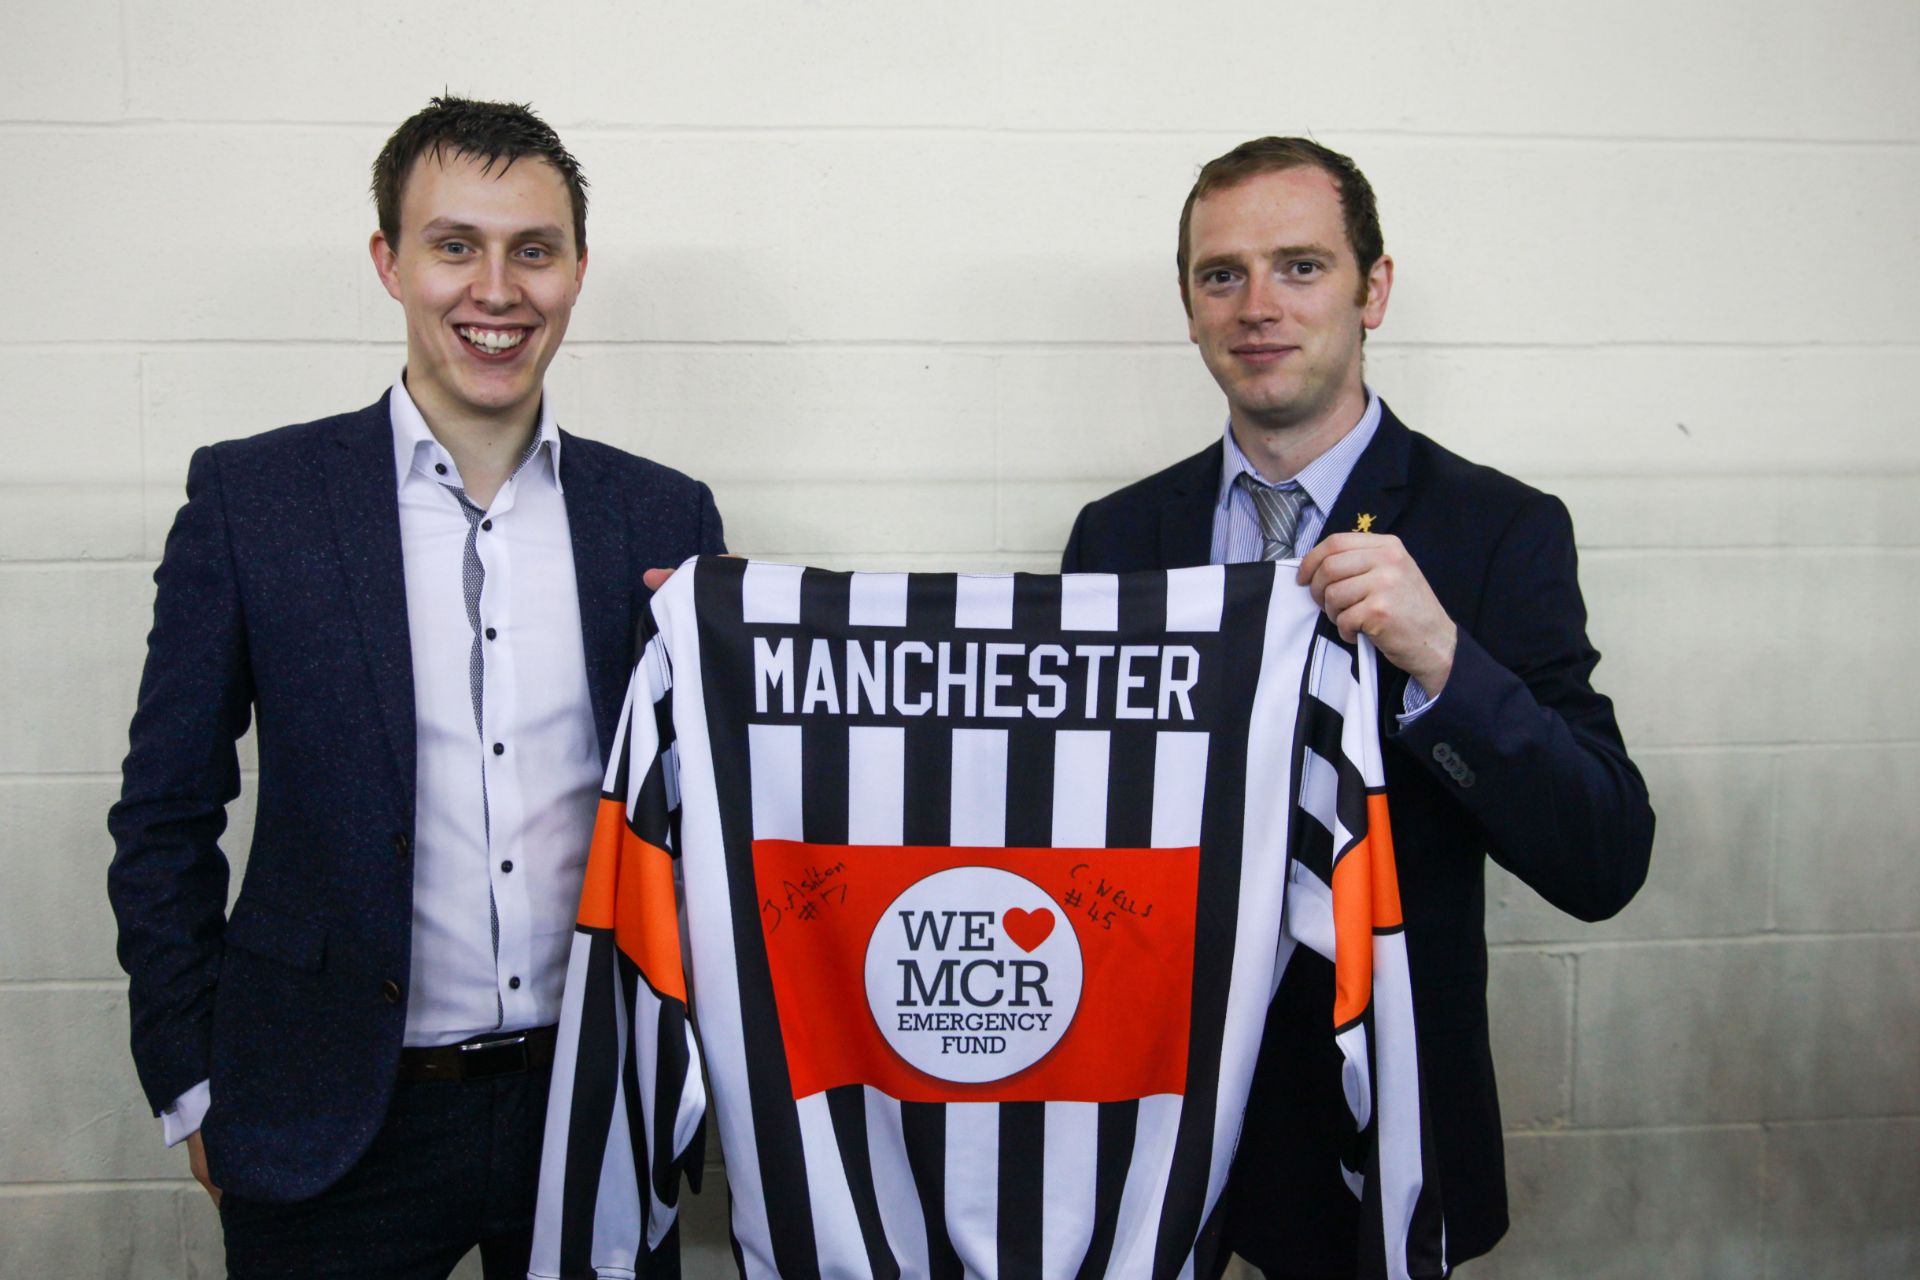 Rhino Signed Referee Shirt with the word 'Manchester' and the Manchester Bee image - Image 3 of 3